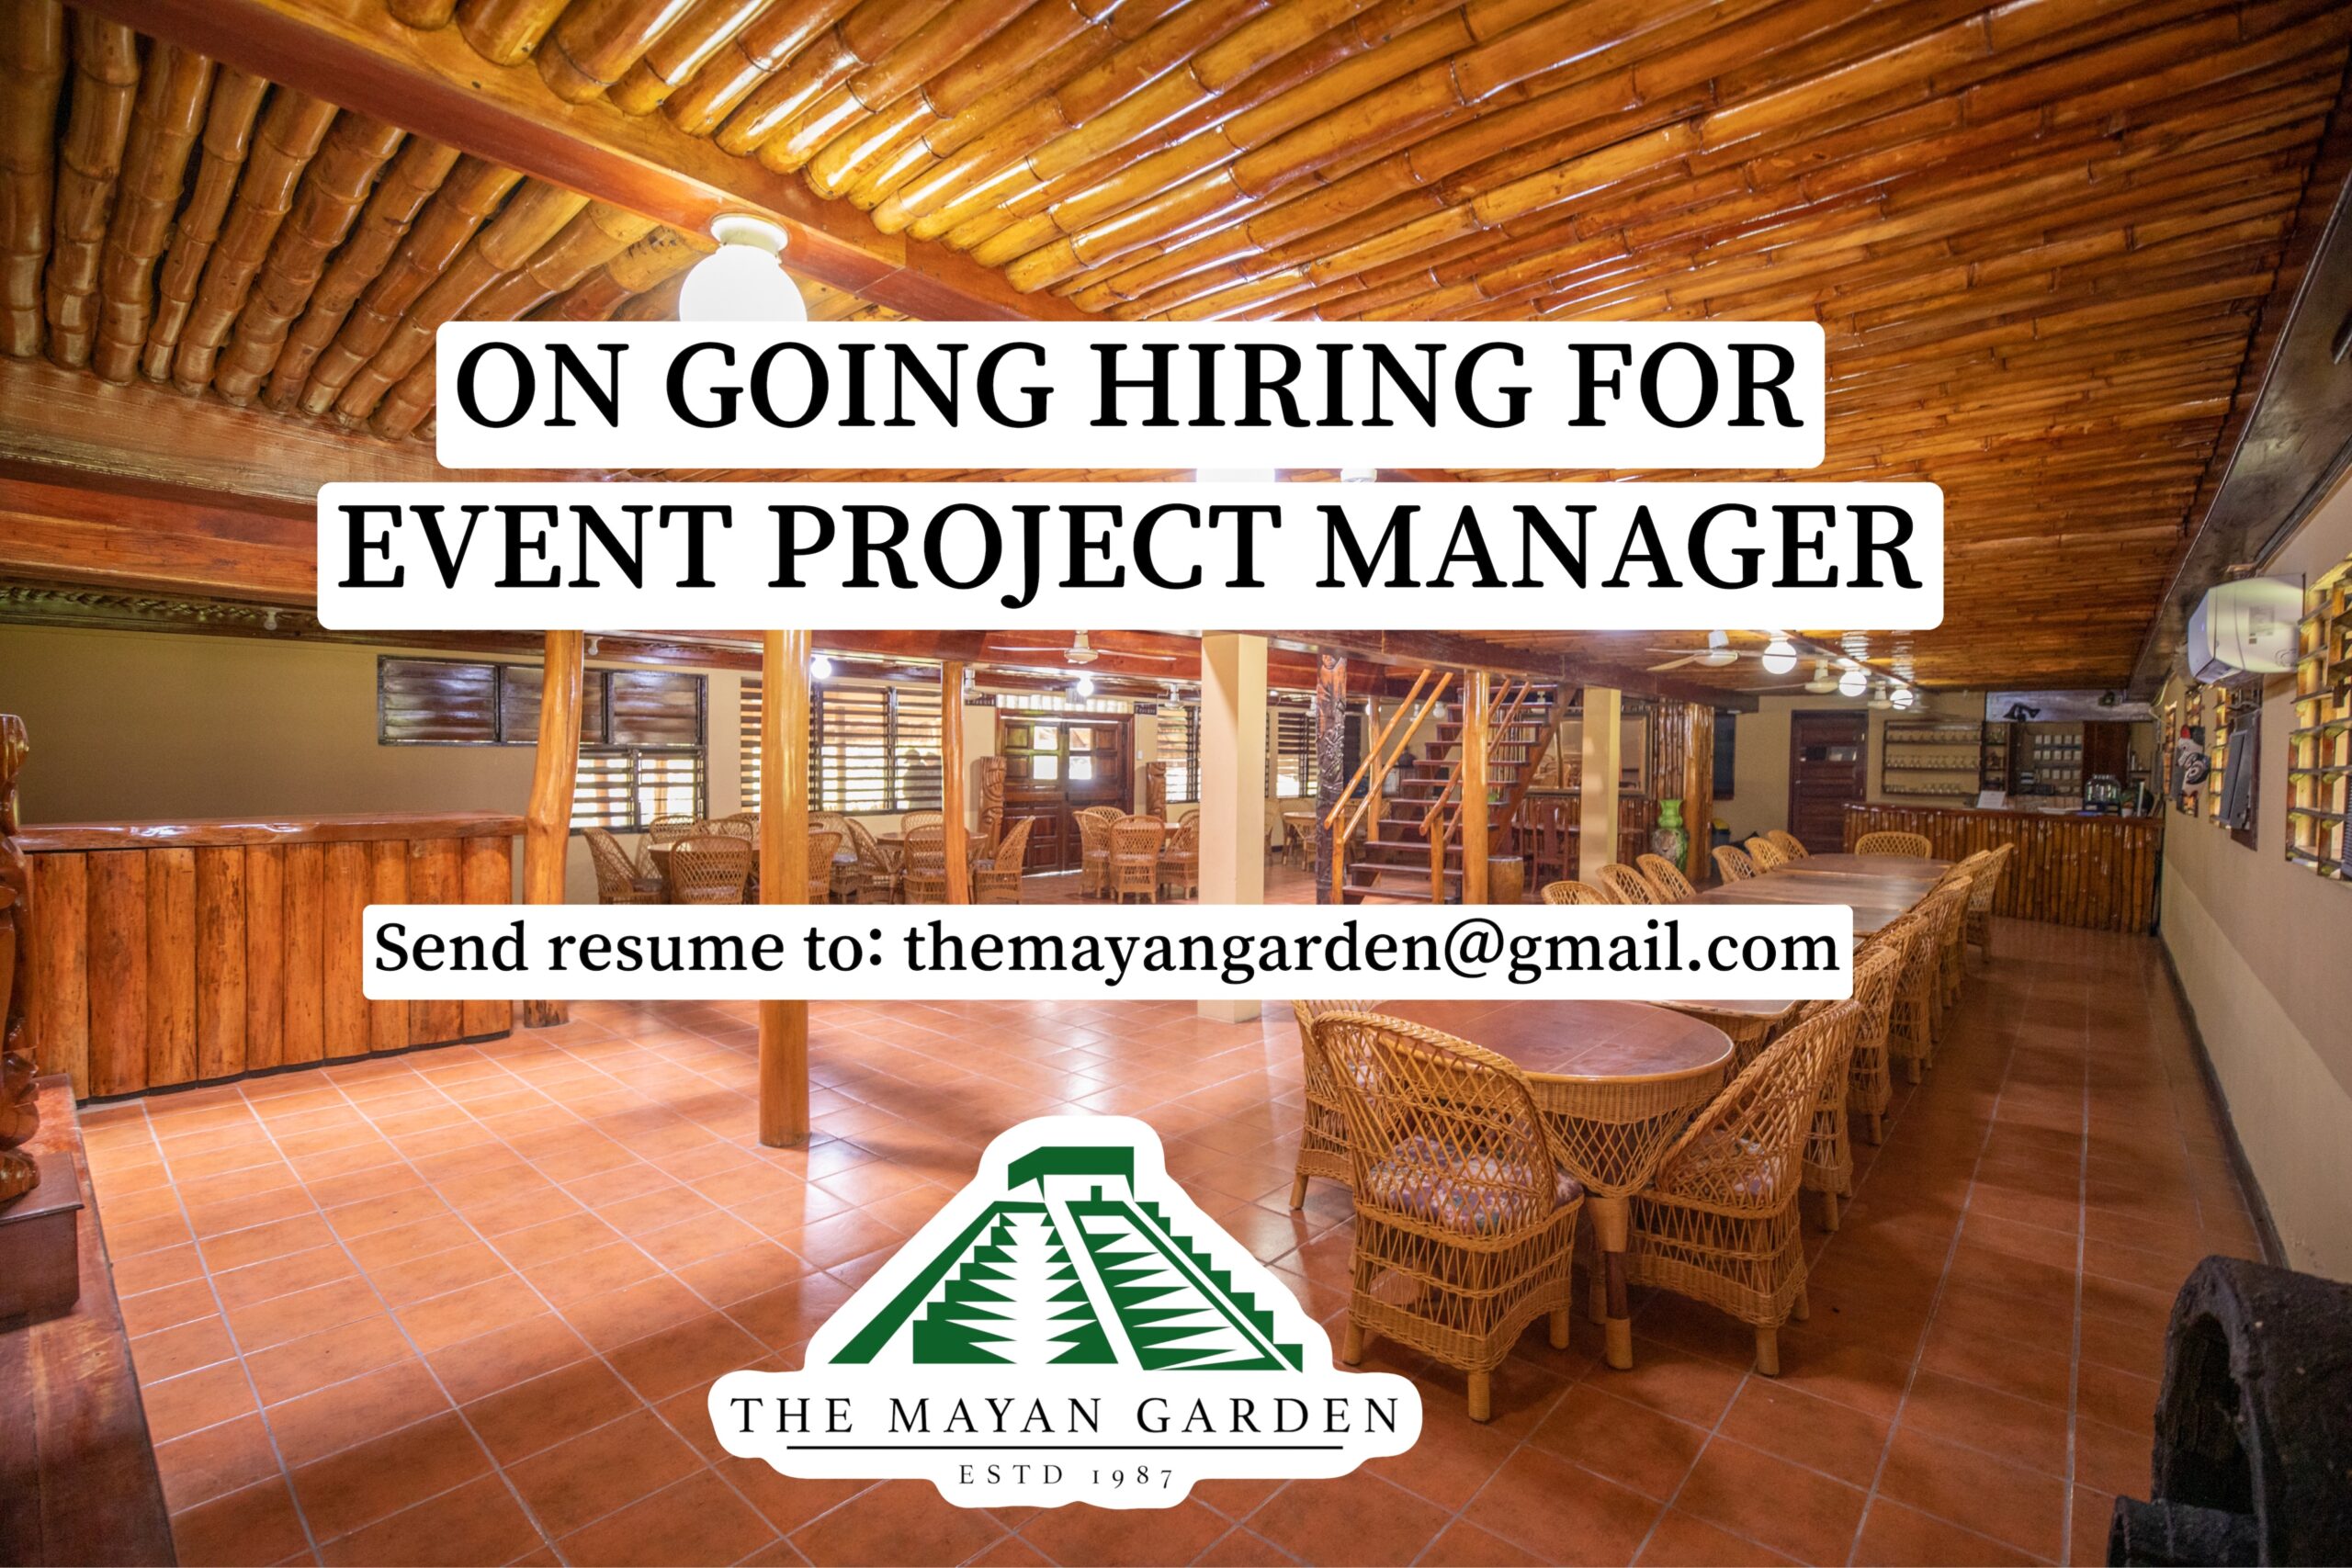 Now Hiring: Event Project Manager